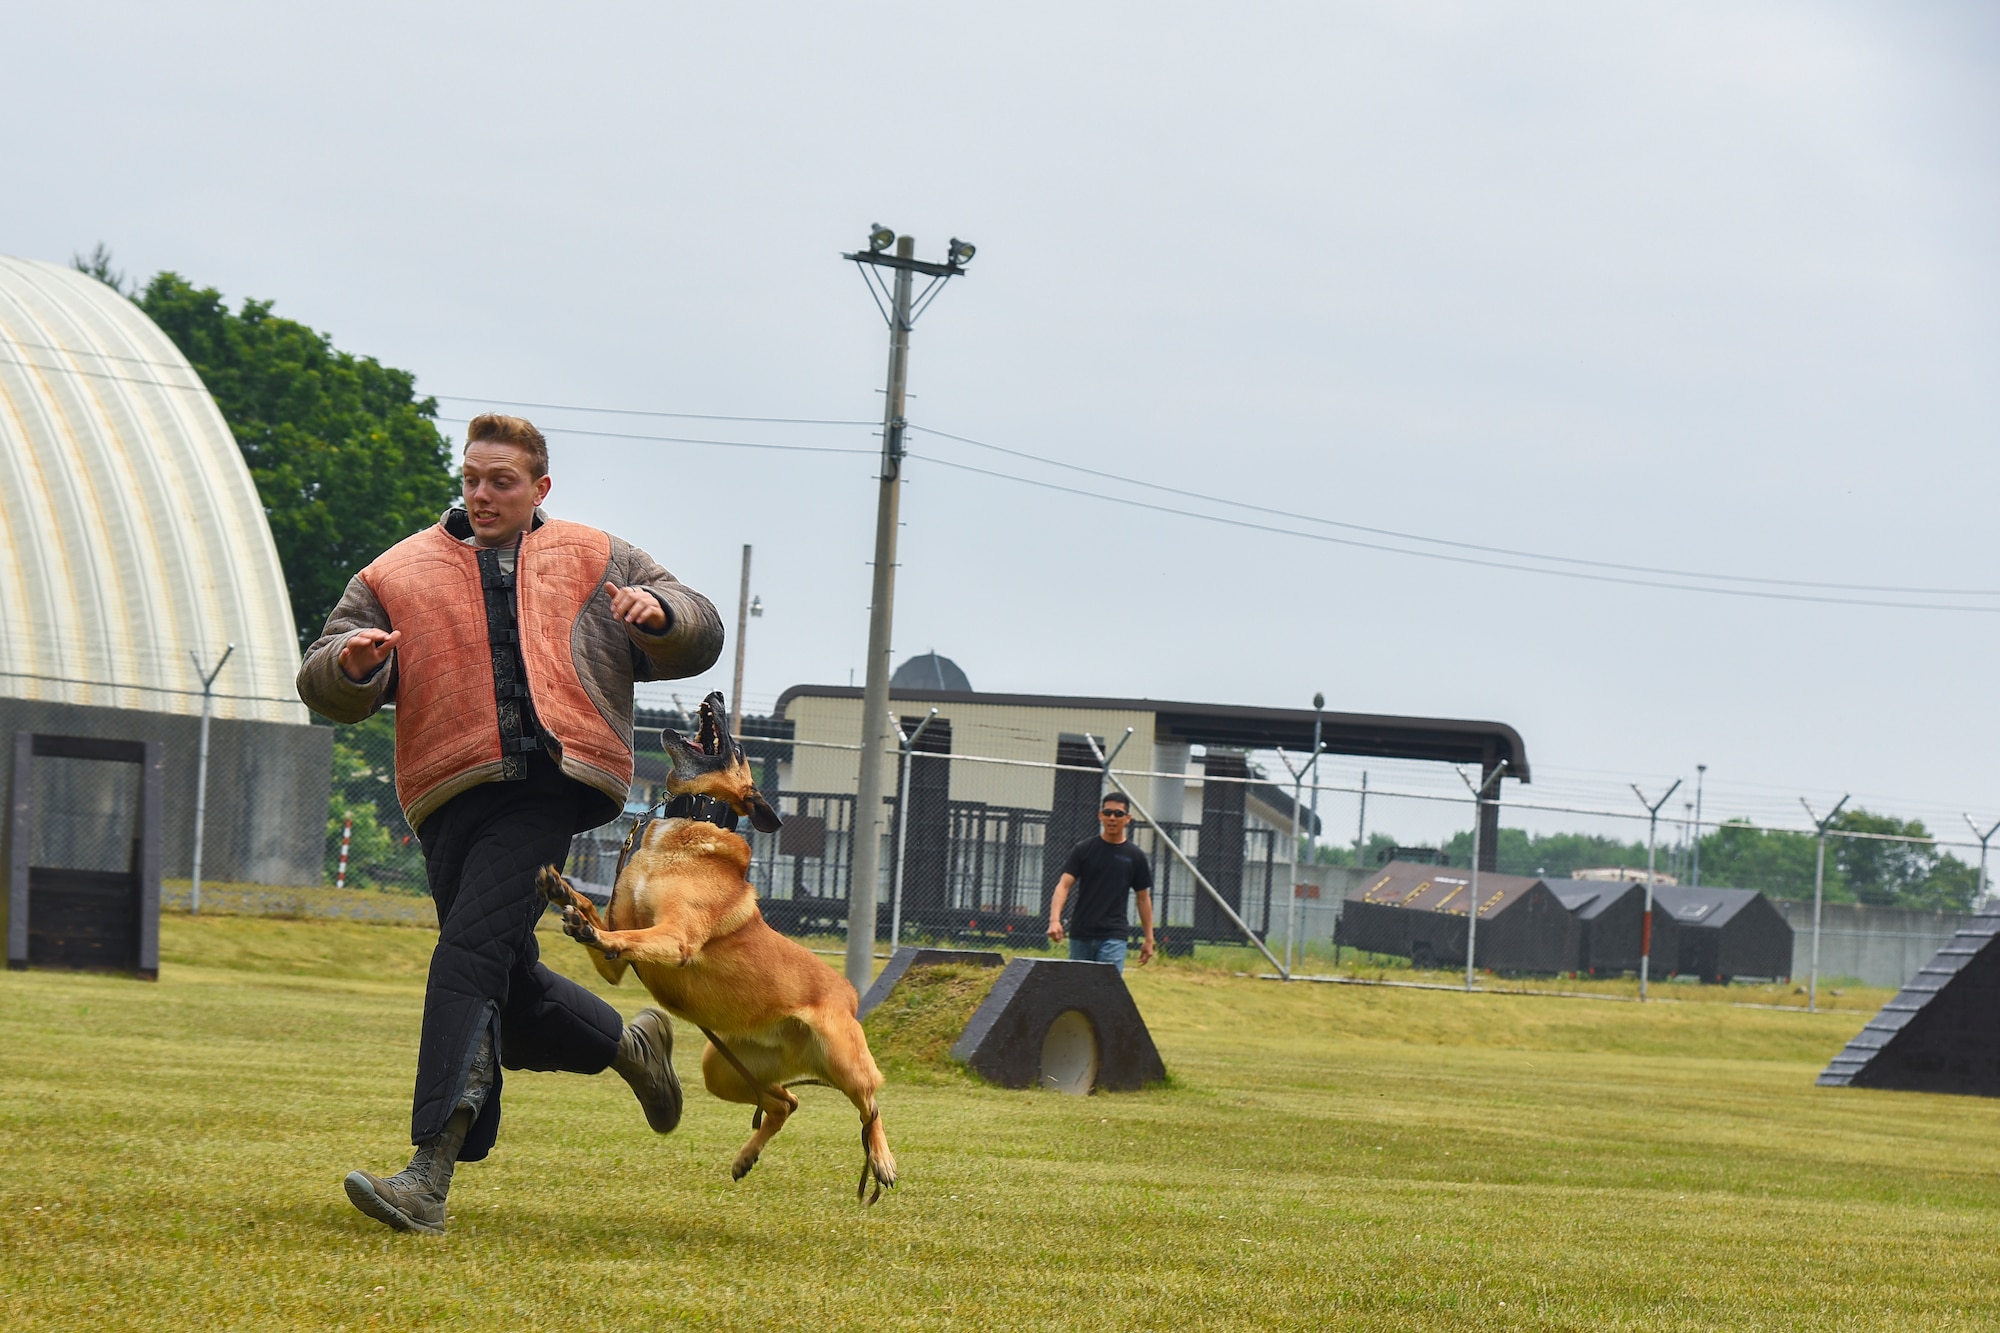 Cadet 2nd Class Ben Pagel, an Air Force Academy cadet, runs from a military working dog during a demonstration at Misawa Air Base, Japan, June 18, 2018. Before their junior year at the Academy, cadets visit an active duty Air Force base to learn more about the operational Air Force and its career fields. (U.S. Air Force photo by Airman 1st Class Collette Brooks)